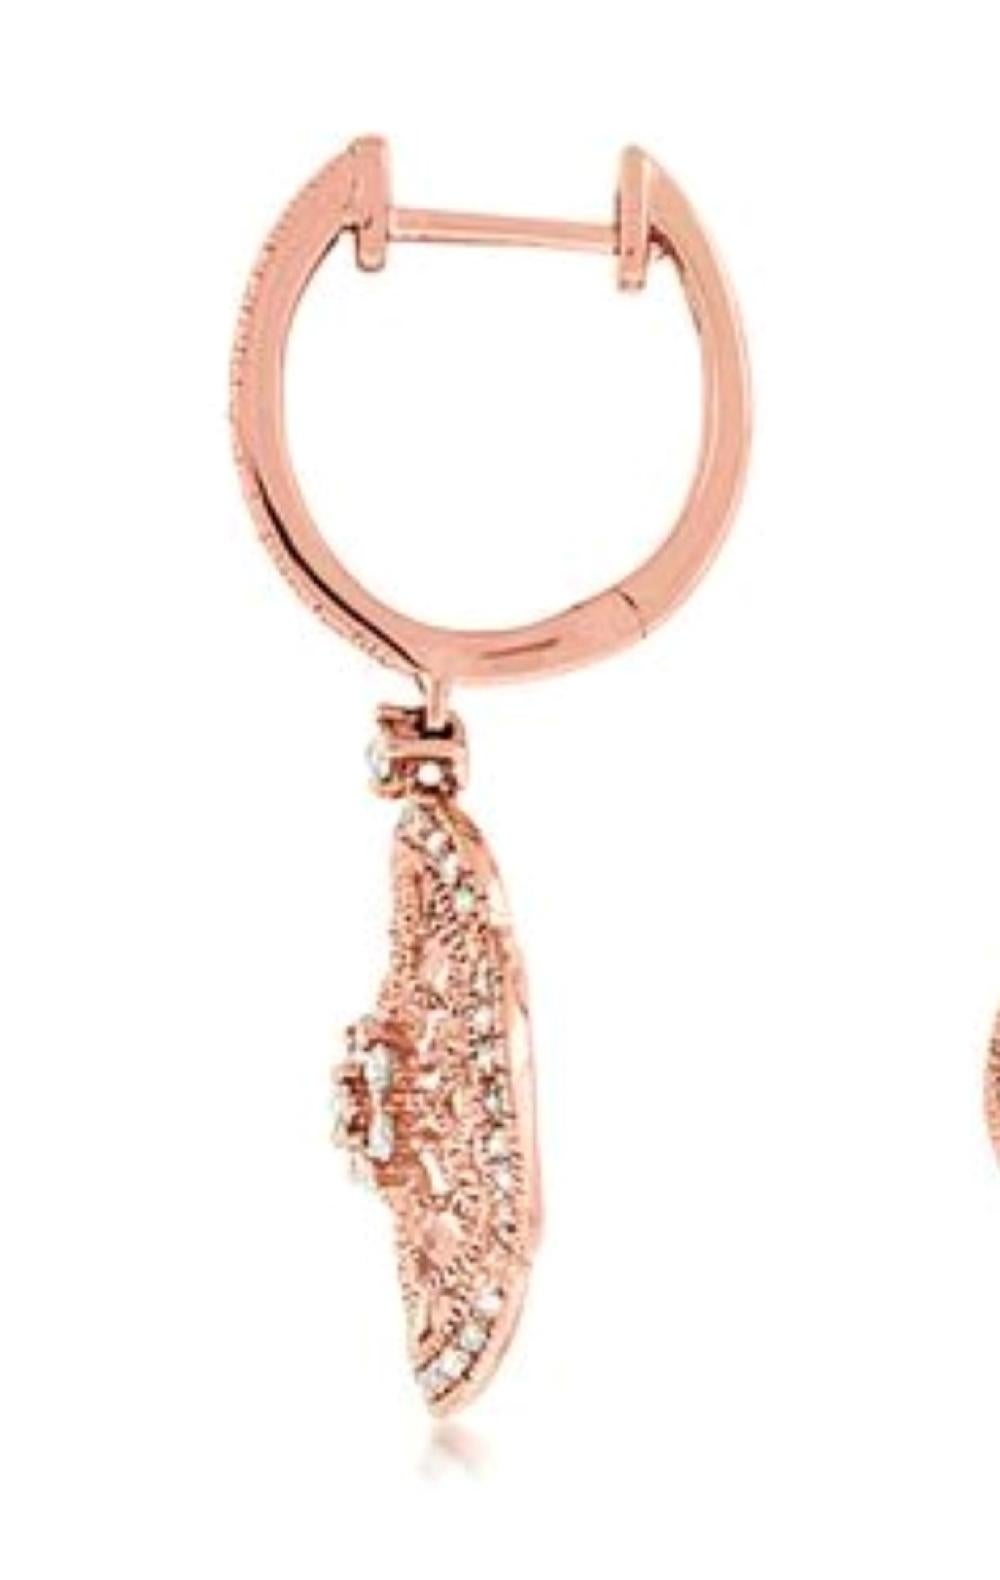 These elegant rose gold drops proudly display .52 carats total weight of round brilliant cut diamonds and delicate filigree work crafted from fine 14 karat rose gold.